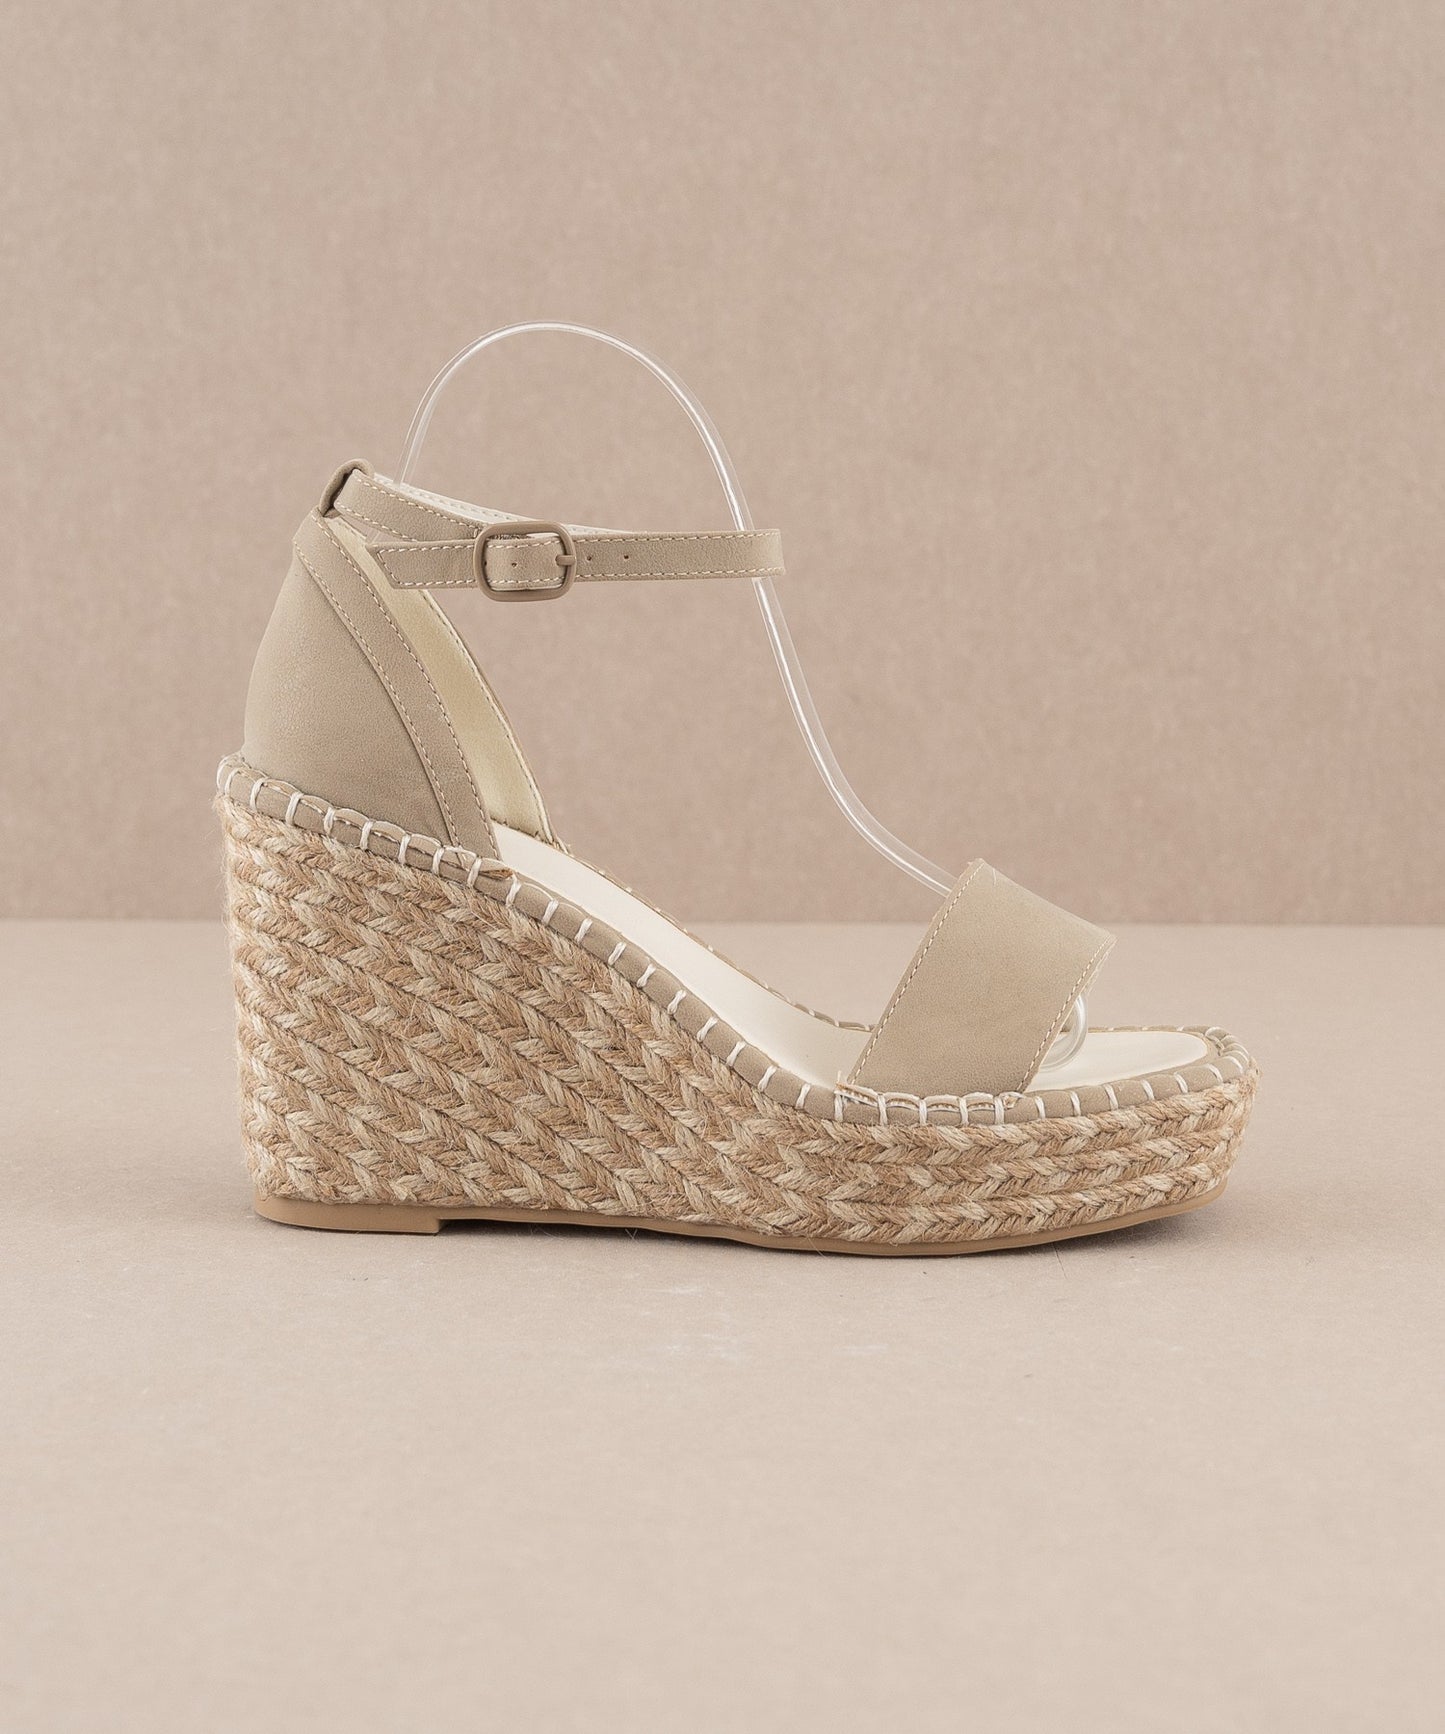 The Lily Wedges